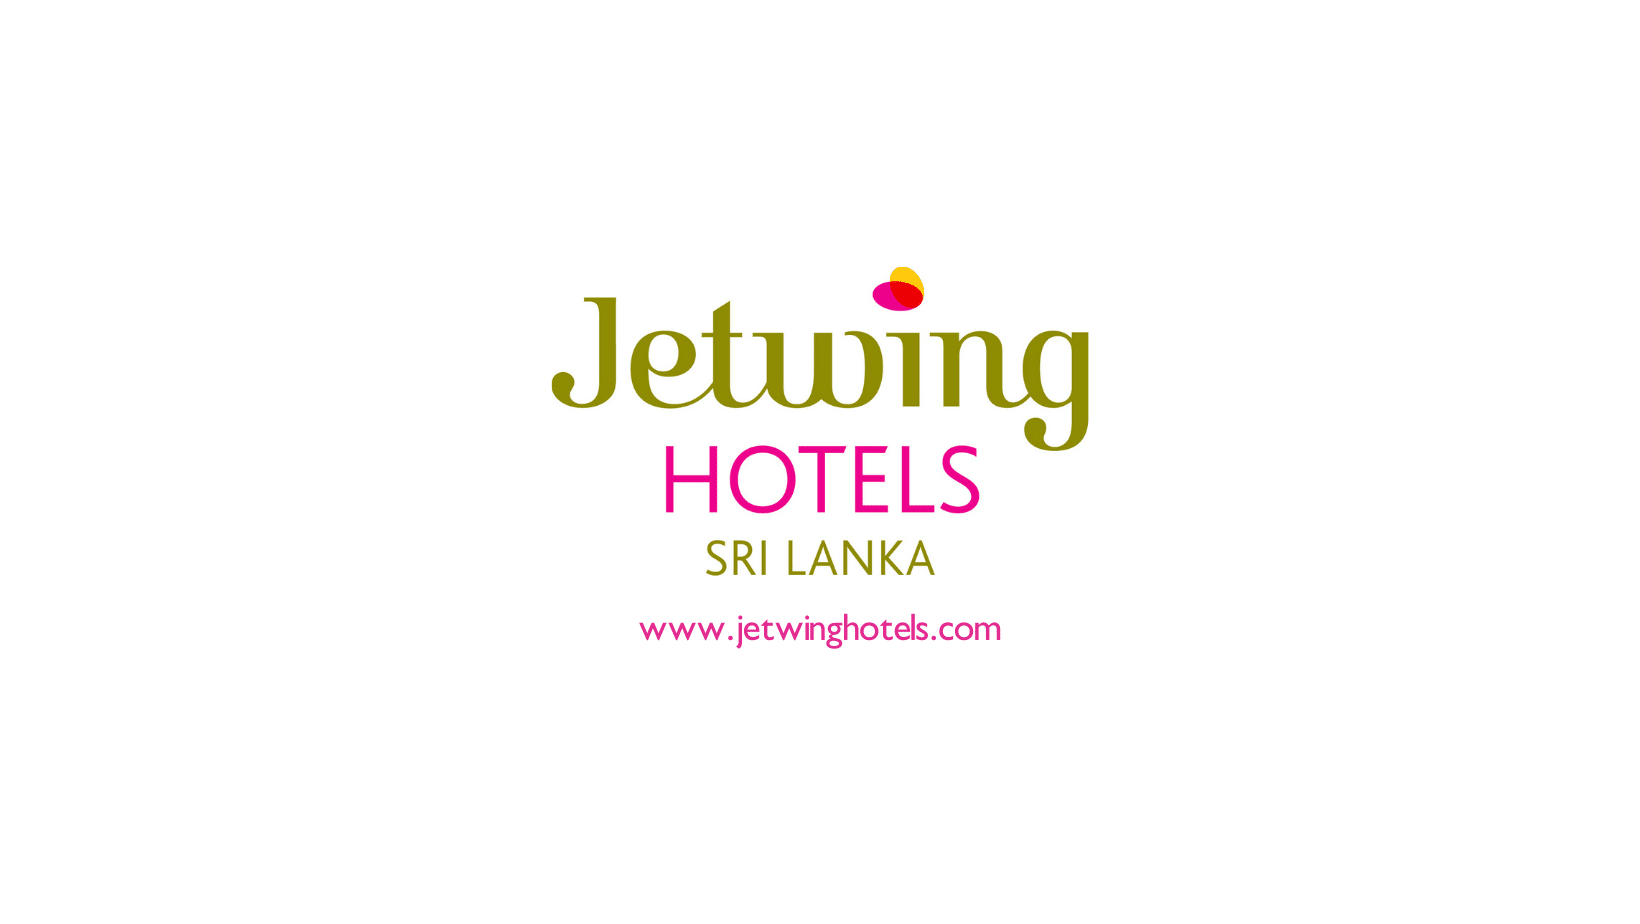 Jetwing Hotel